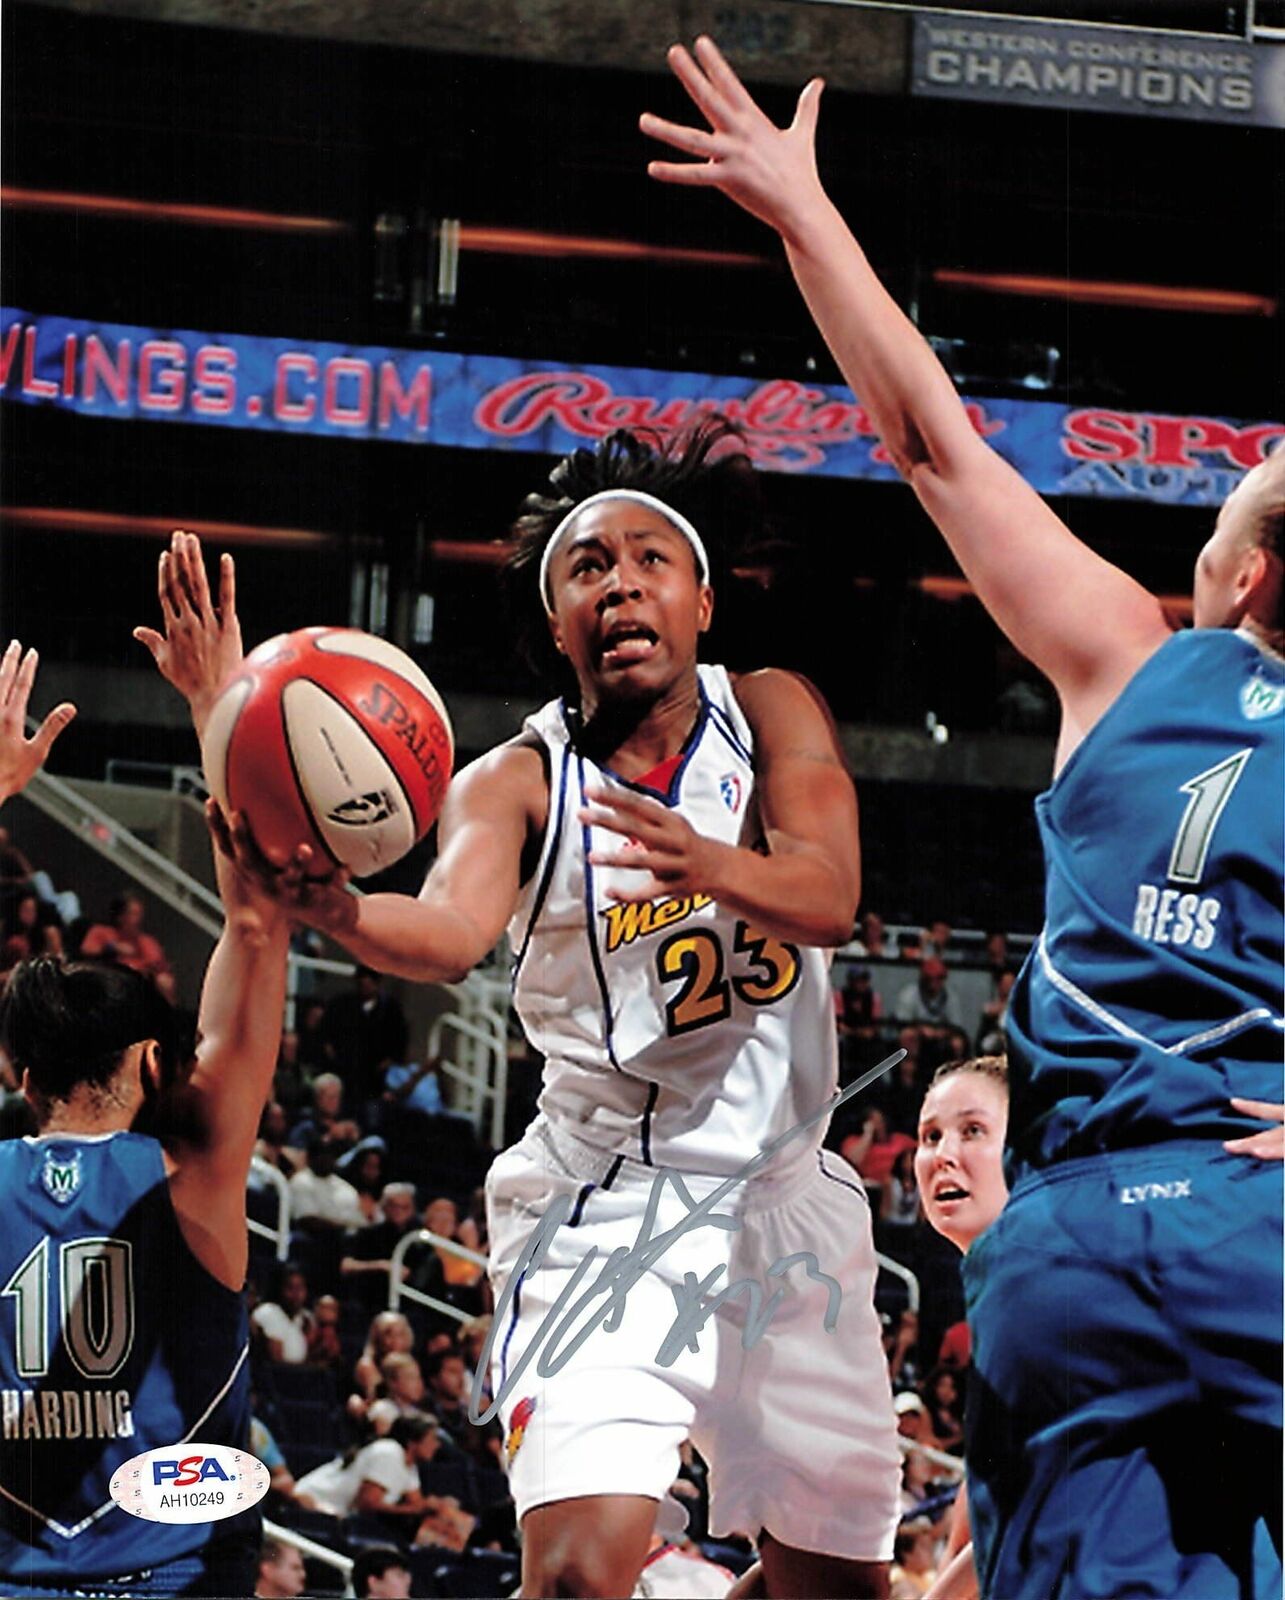 Cappie Pondexter Signed 8x10 Photo Poster painting WNBA PSA/DNA Autographed Indiana Fever